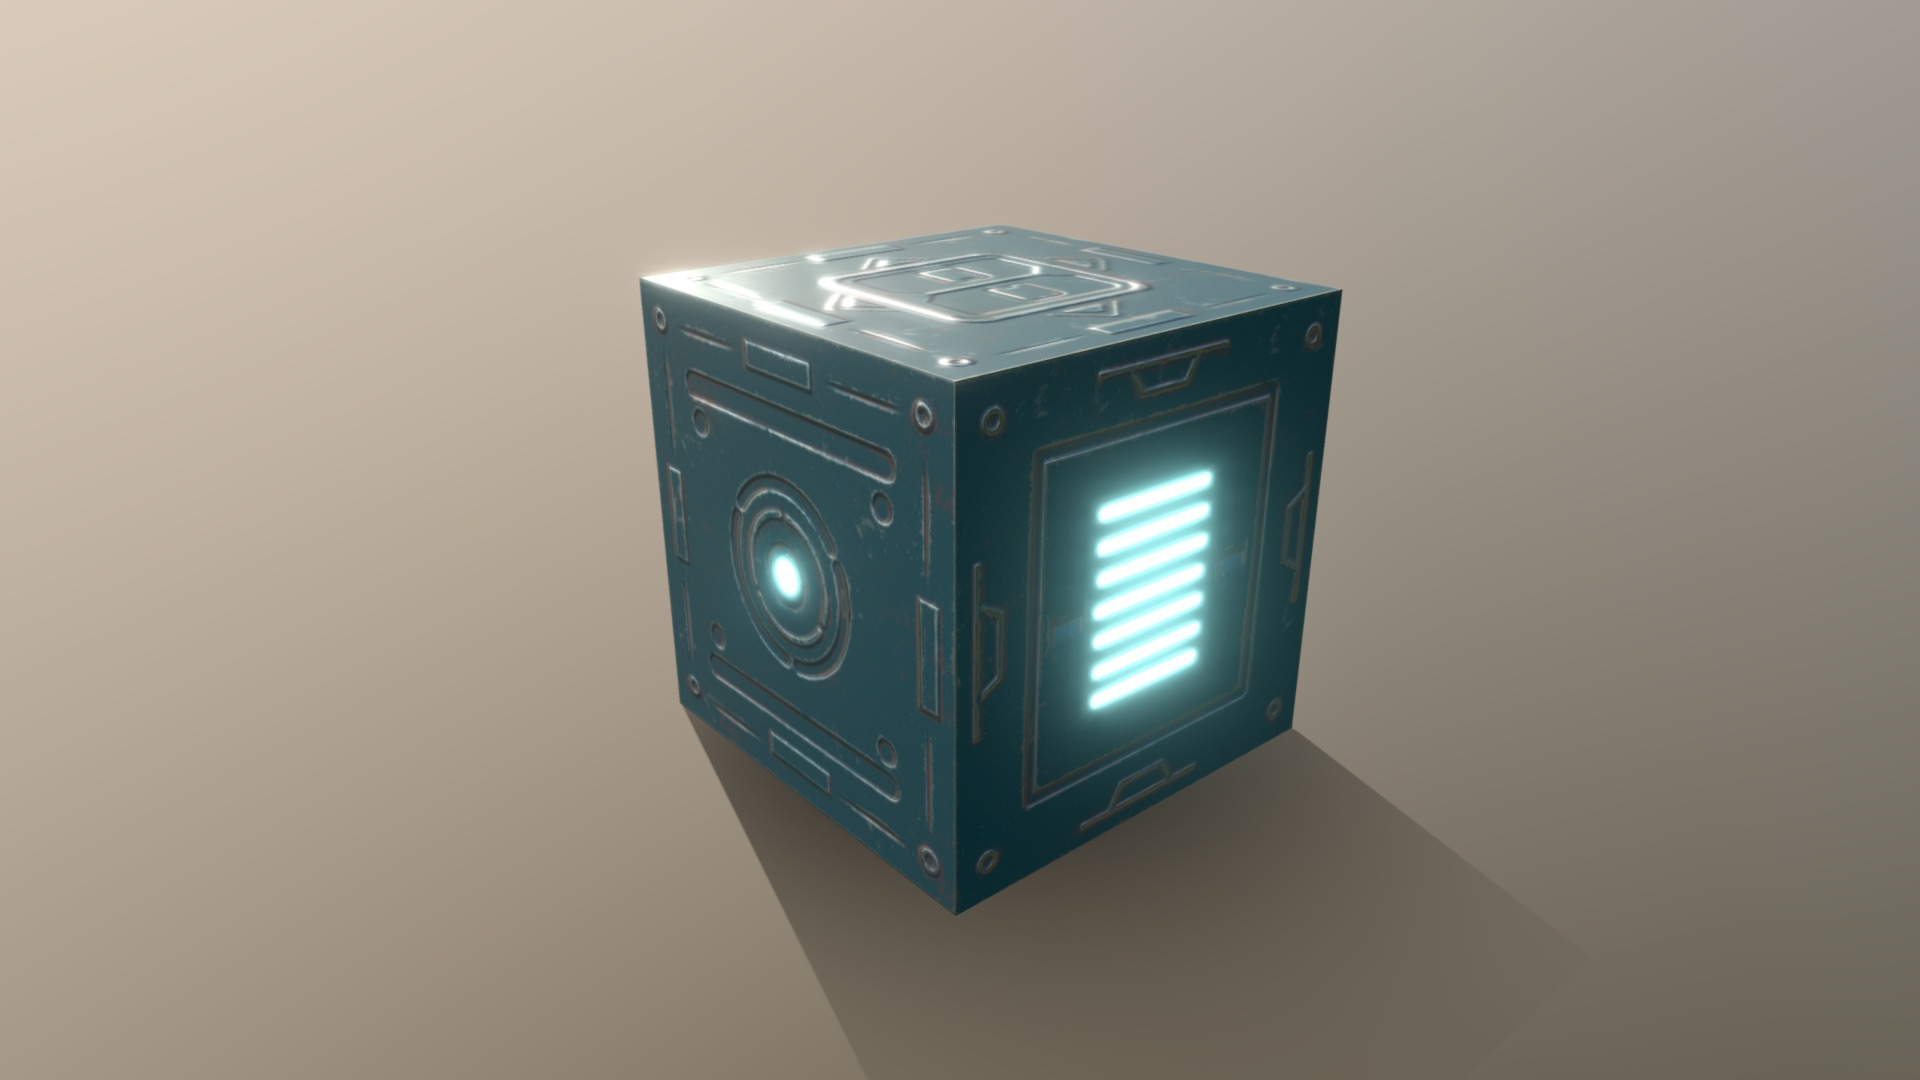 3D model Scifi Crate Low Poly Game Asset Textured - This is a 3D model of the Scifi Crate Low Poly Game Asset Textured. The 3D model is about a blue rectangular object with a light.